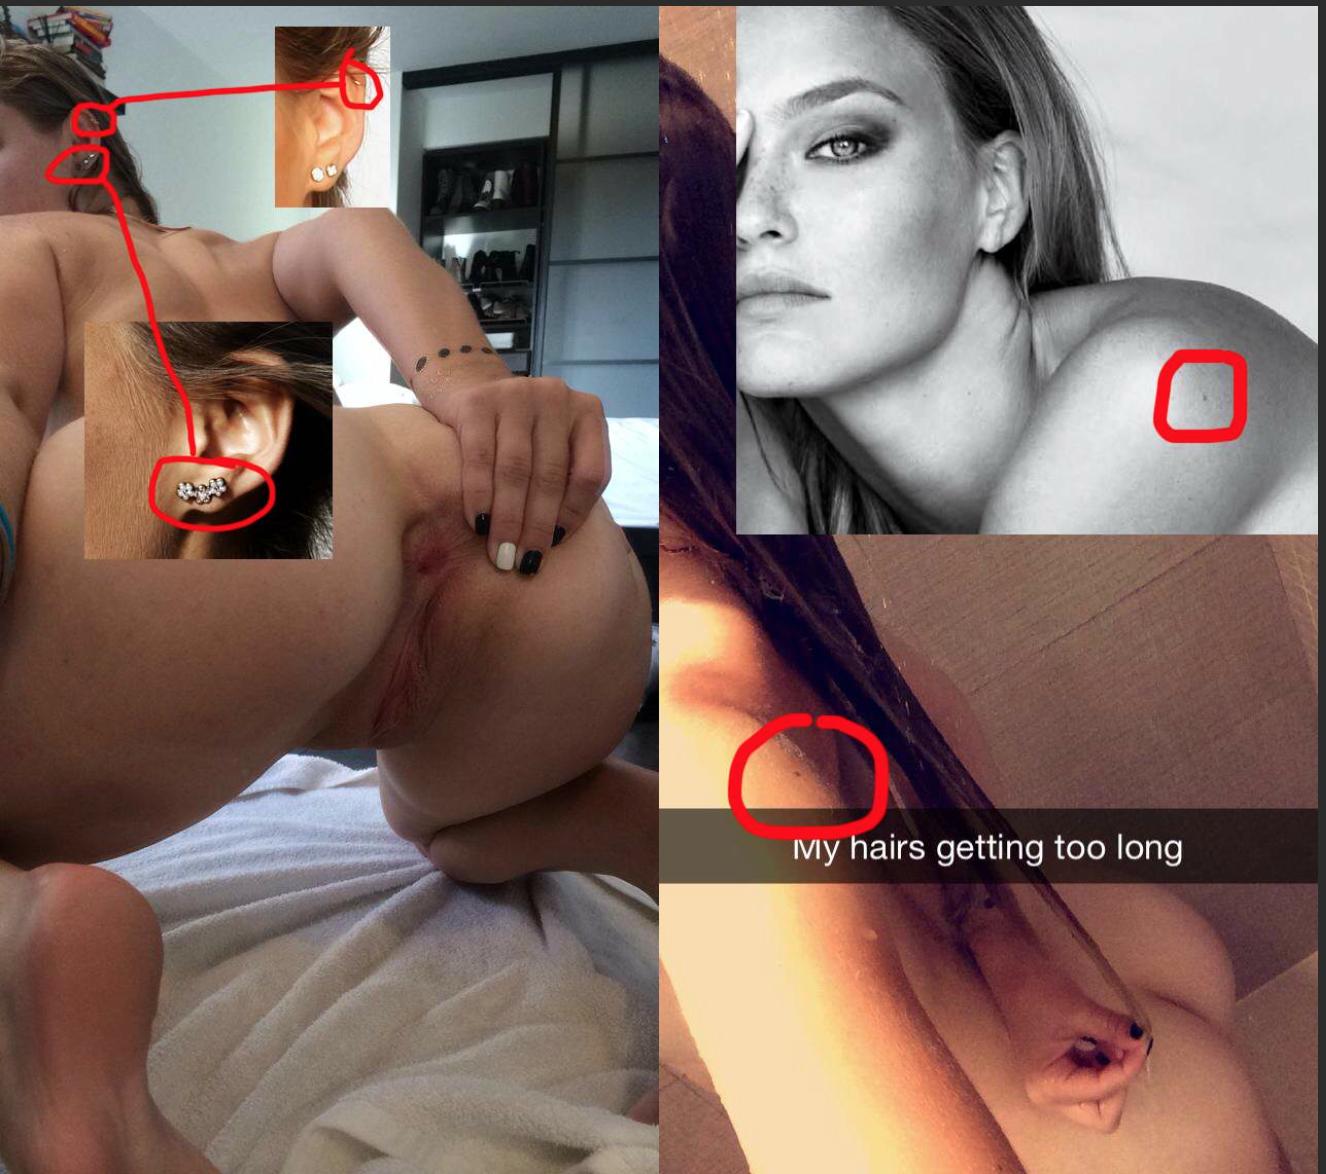 The Top 10 Unposted Celebrity Nude Leaks